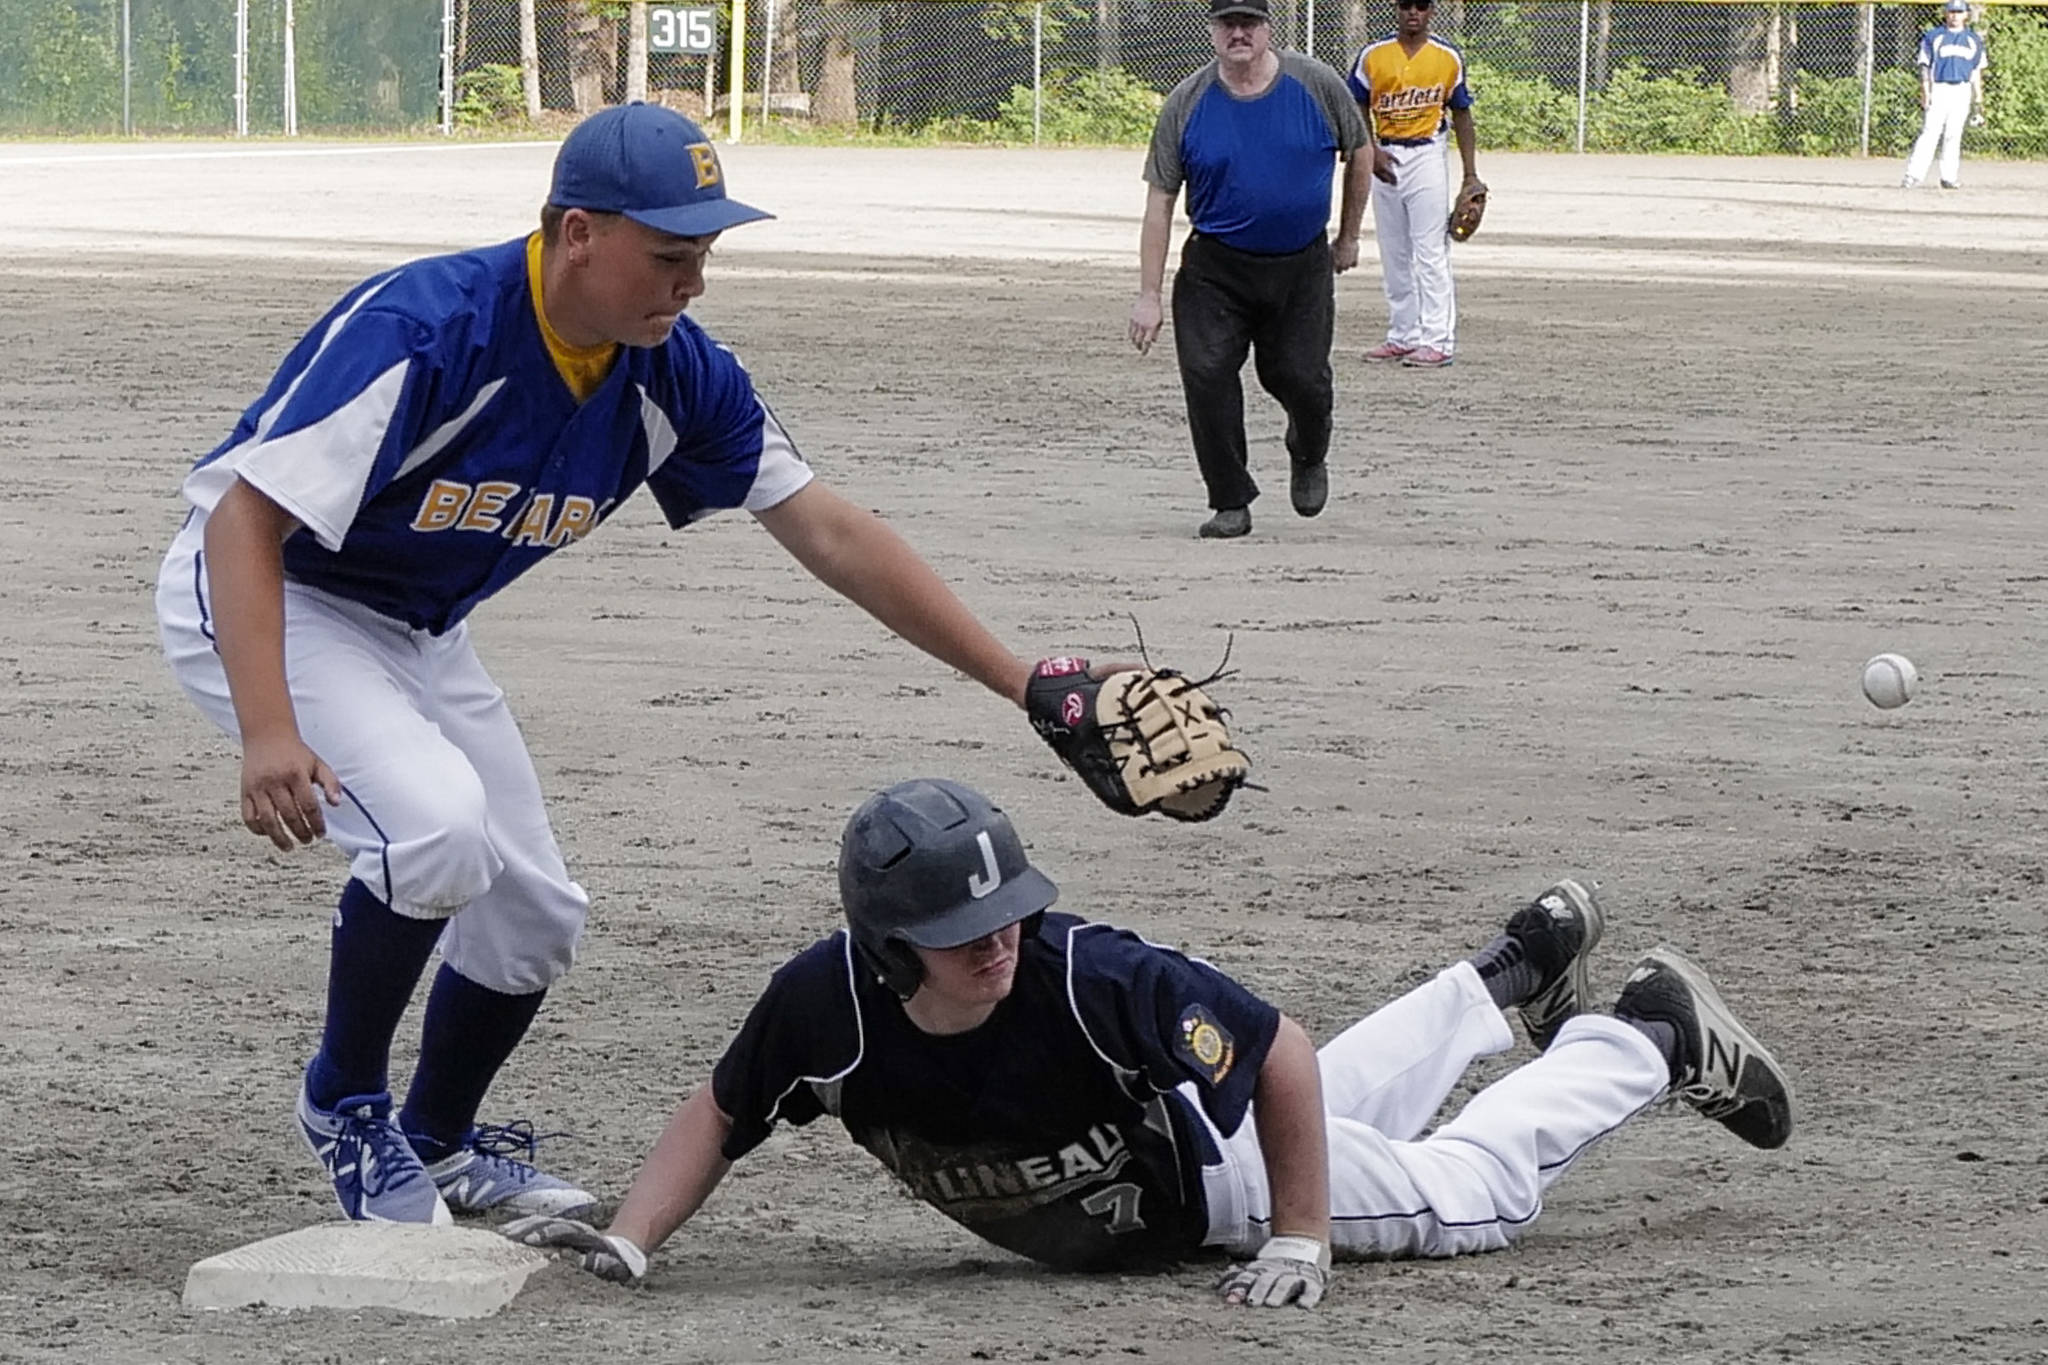 Juneau’s Brock McCormick dives safely back to first base as the ball gets by Bartlett’s Taylor McCartin the fourth inning in Legion League baseball at Adair-Kennedy Memorial Park on Friday, June 21, 2019. (Michael Penn | Juneau Empire)